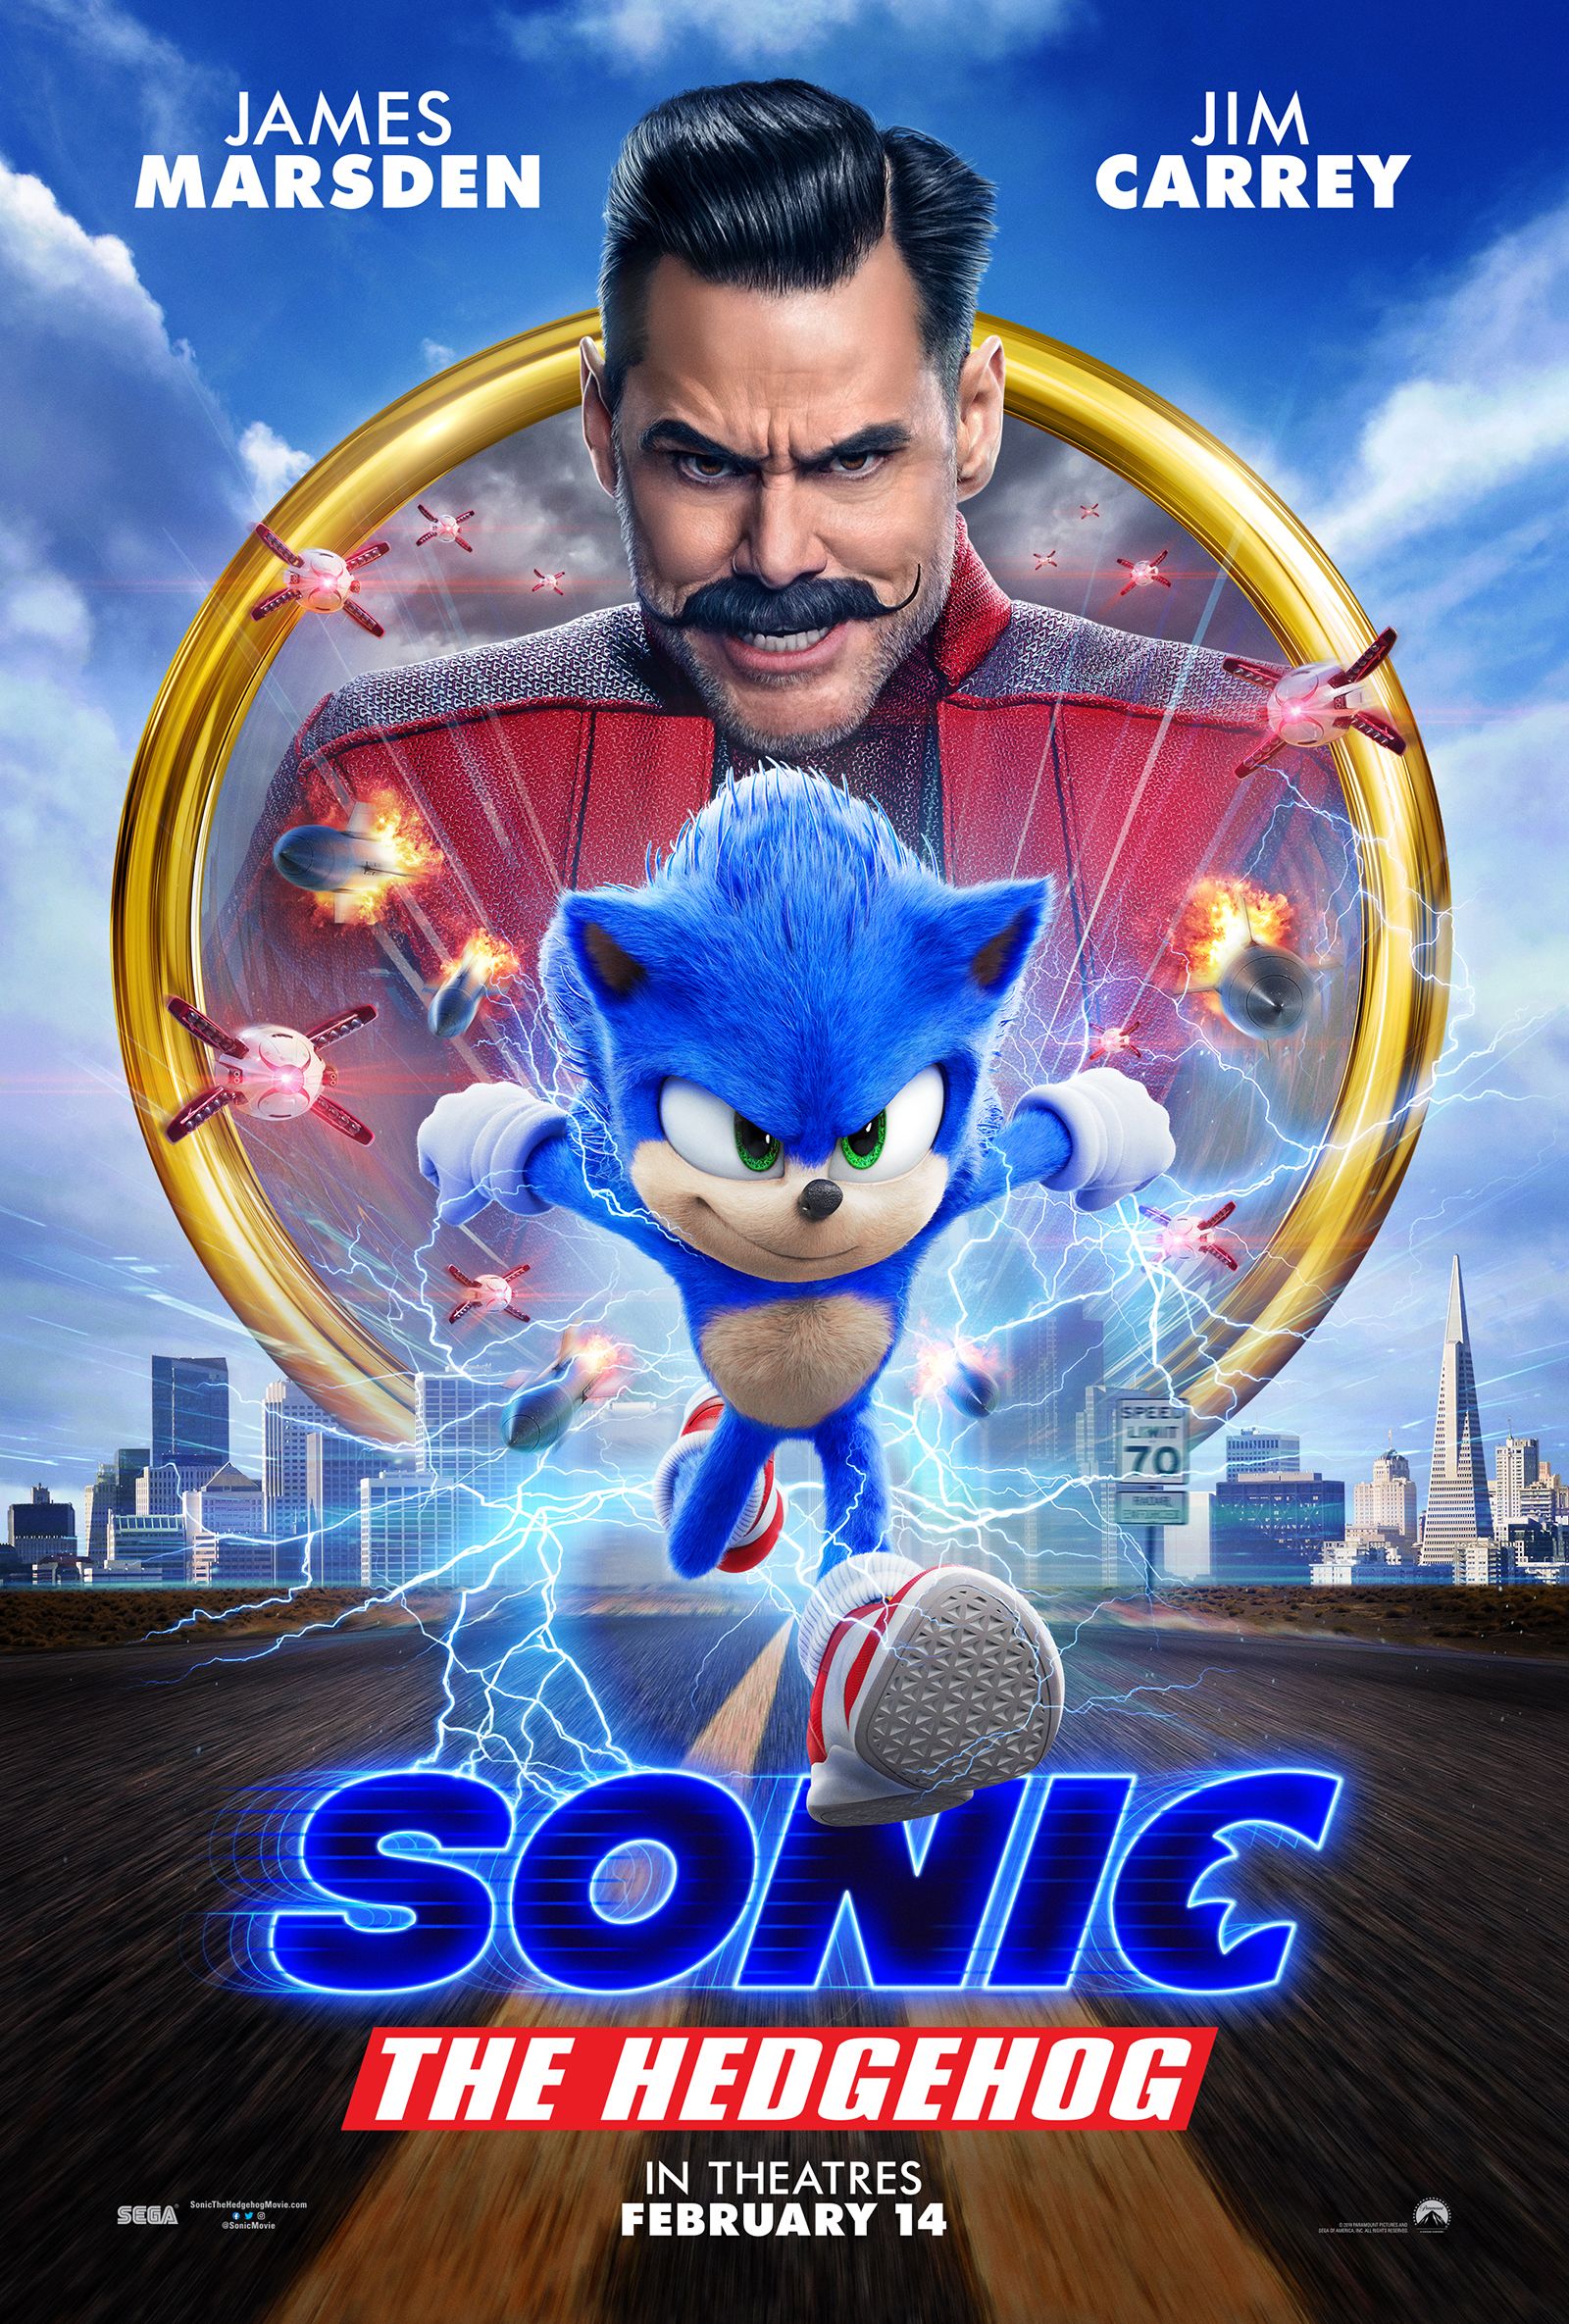 New Sonic The Hedgehog Movie Trailer Is Much Much Better - Watch It Here image 3